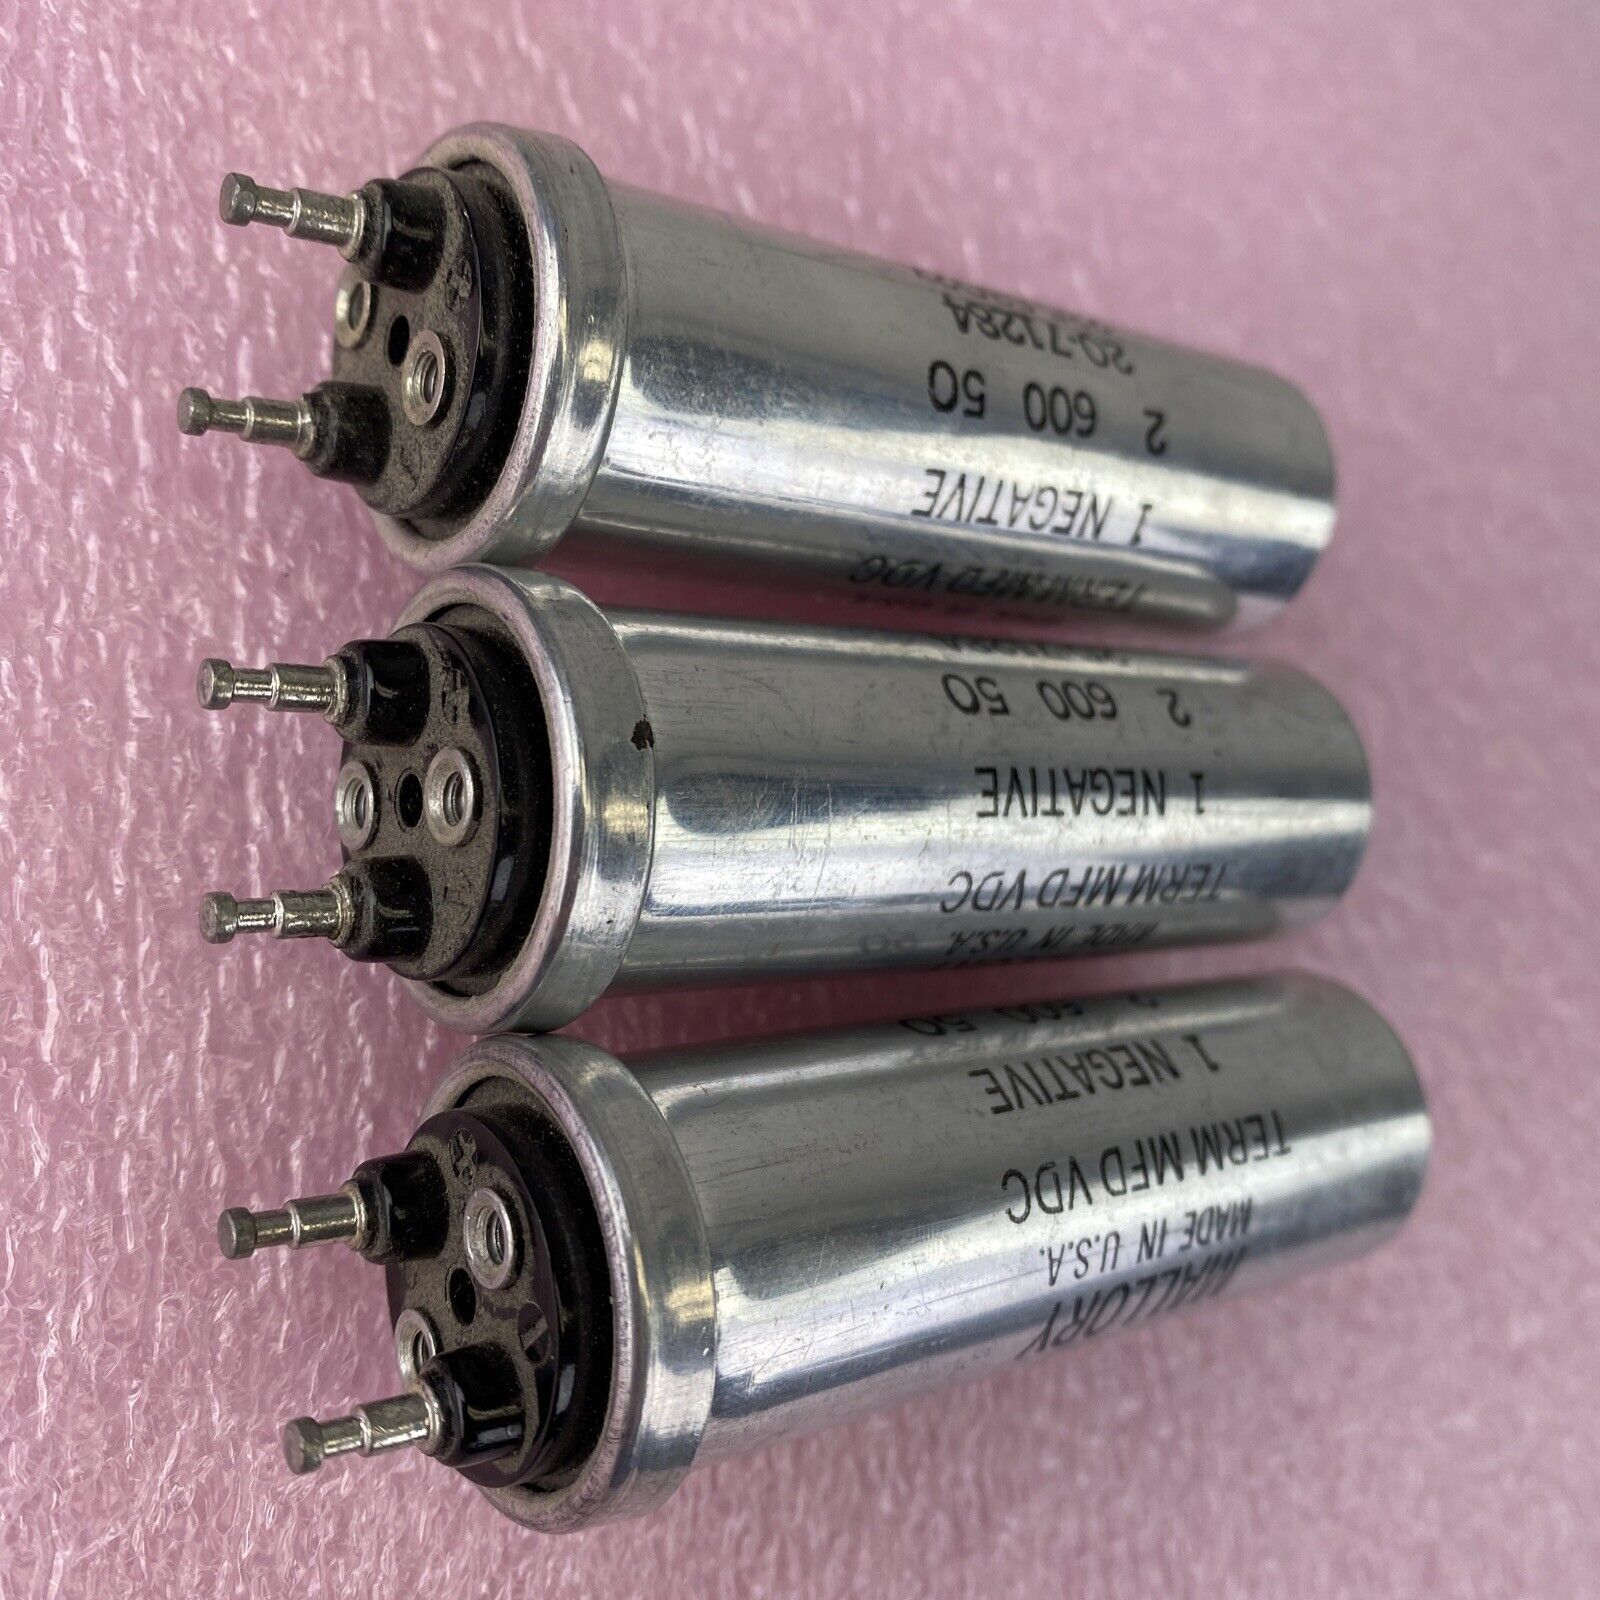 Lot of 3 Mallory 20-71284 600MFD 50VDC electrolytic capacitor 2356302X